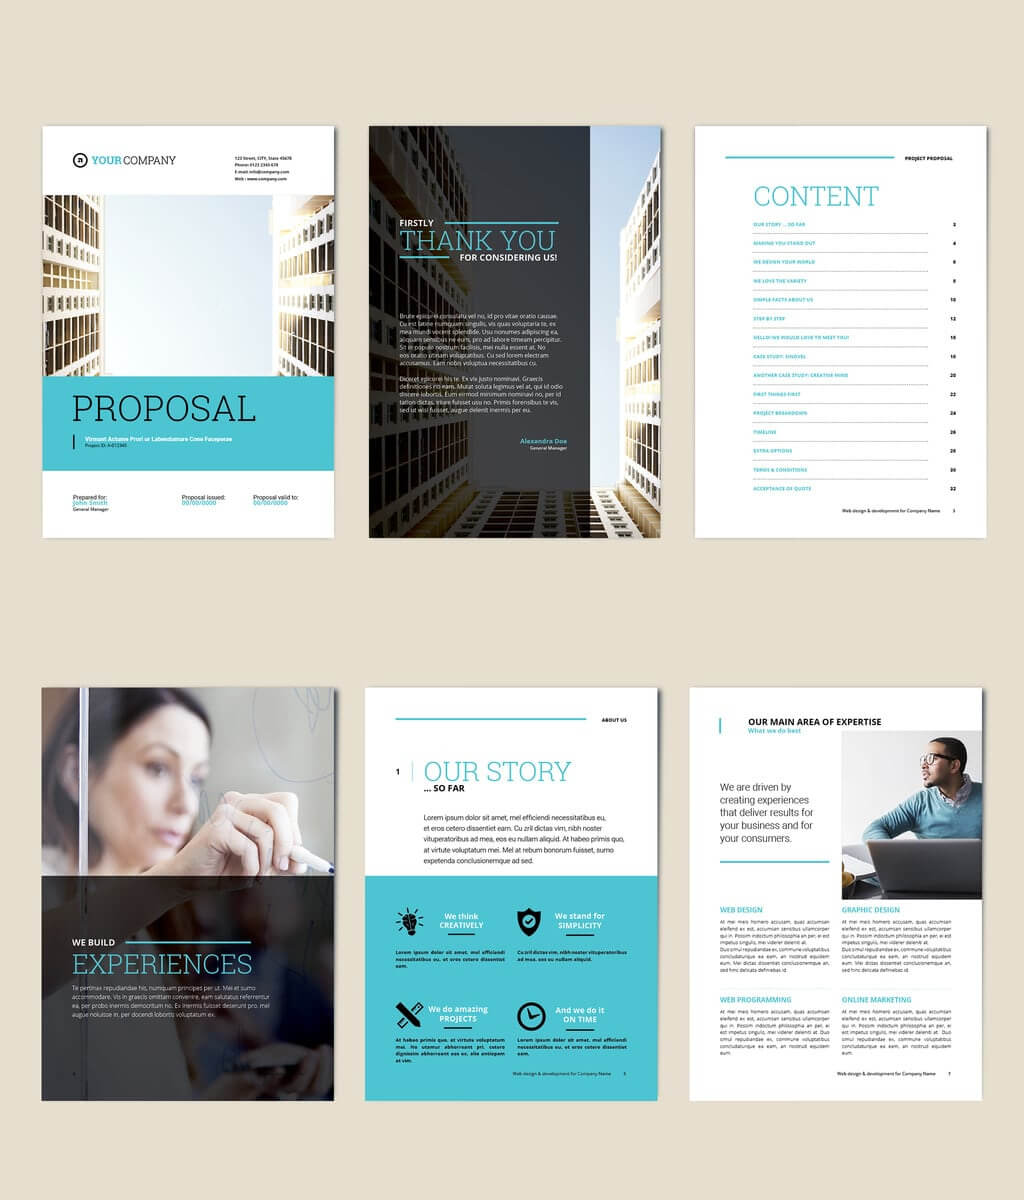 75 Fresh Indesign Templates And Where To Find More Regarding Free Indesign Report Templates